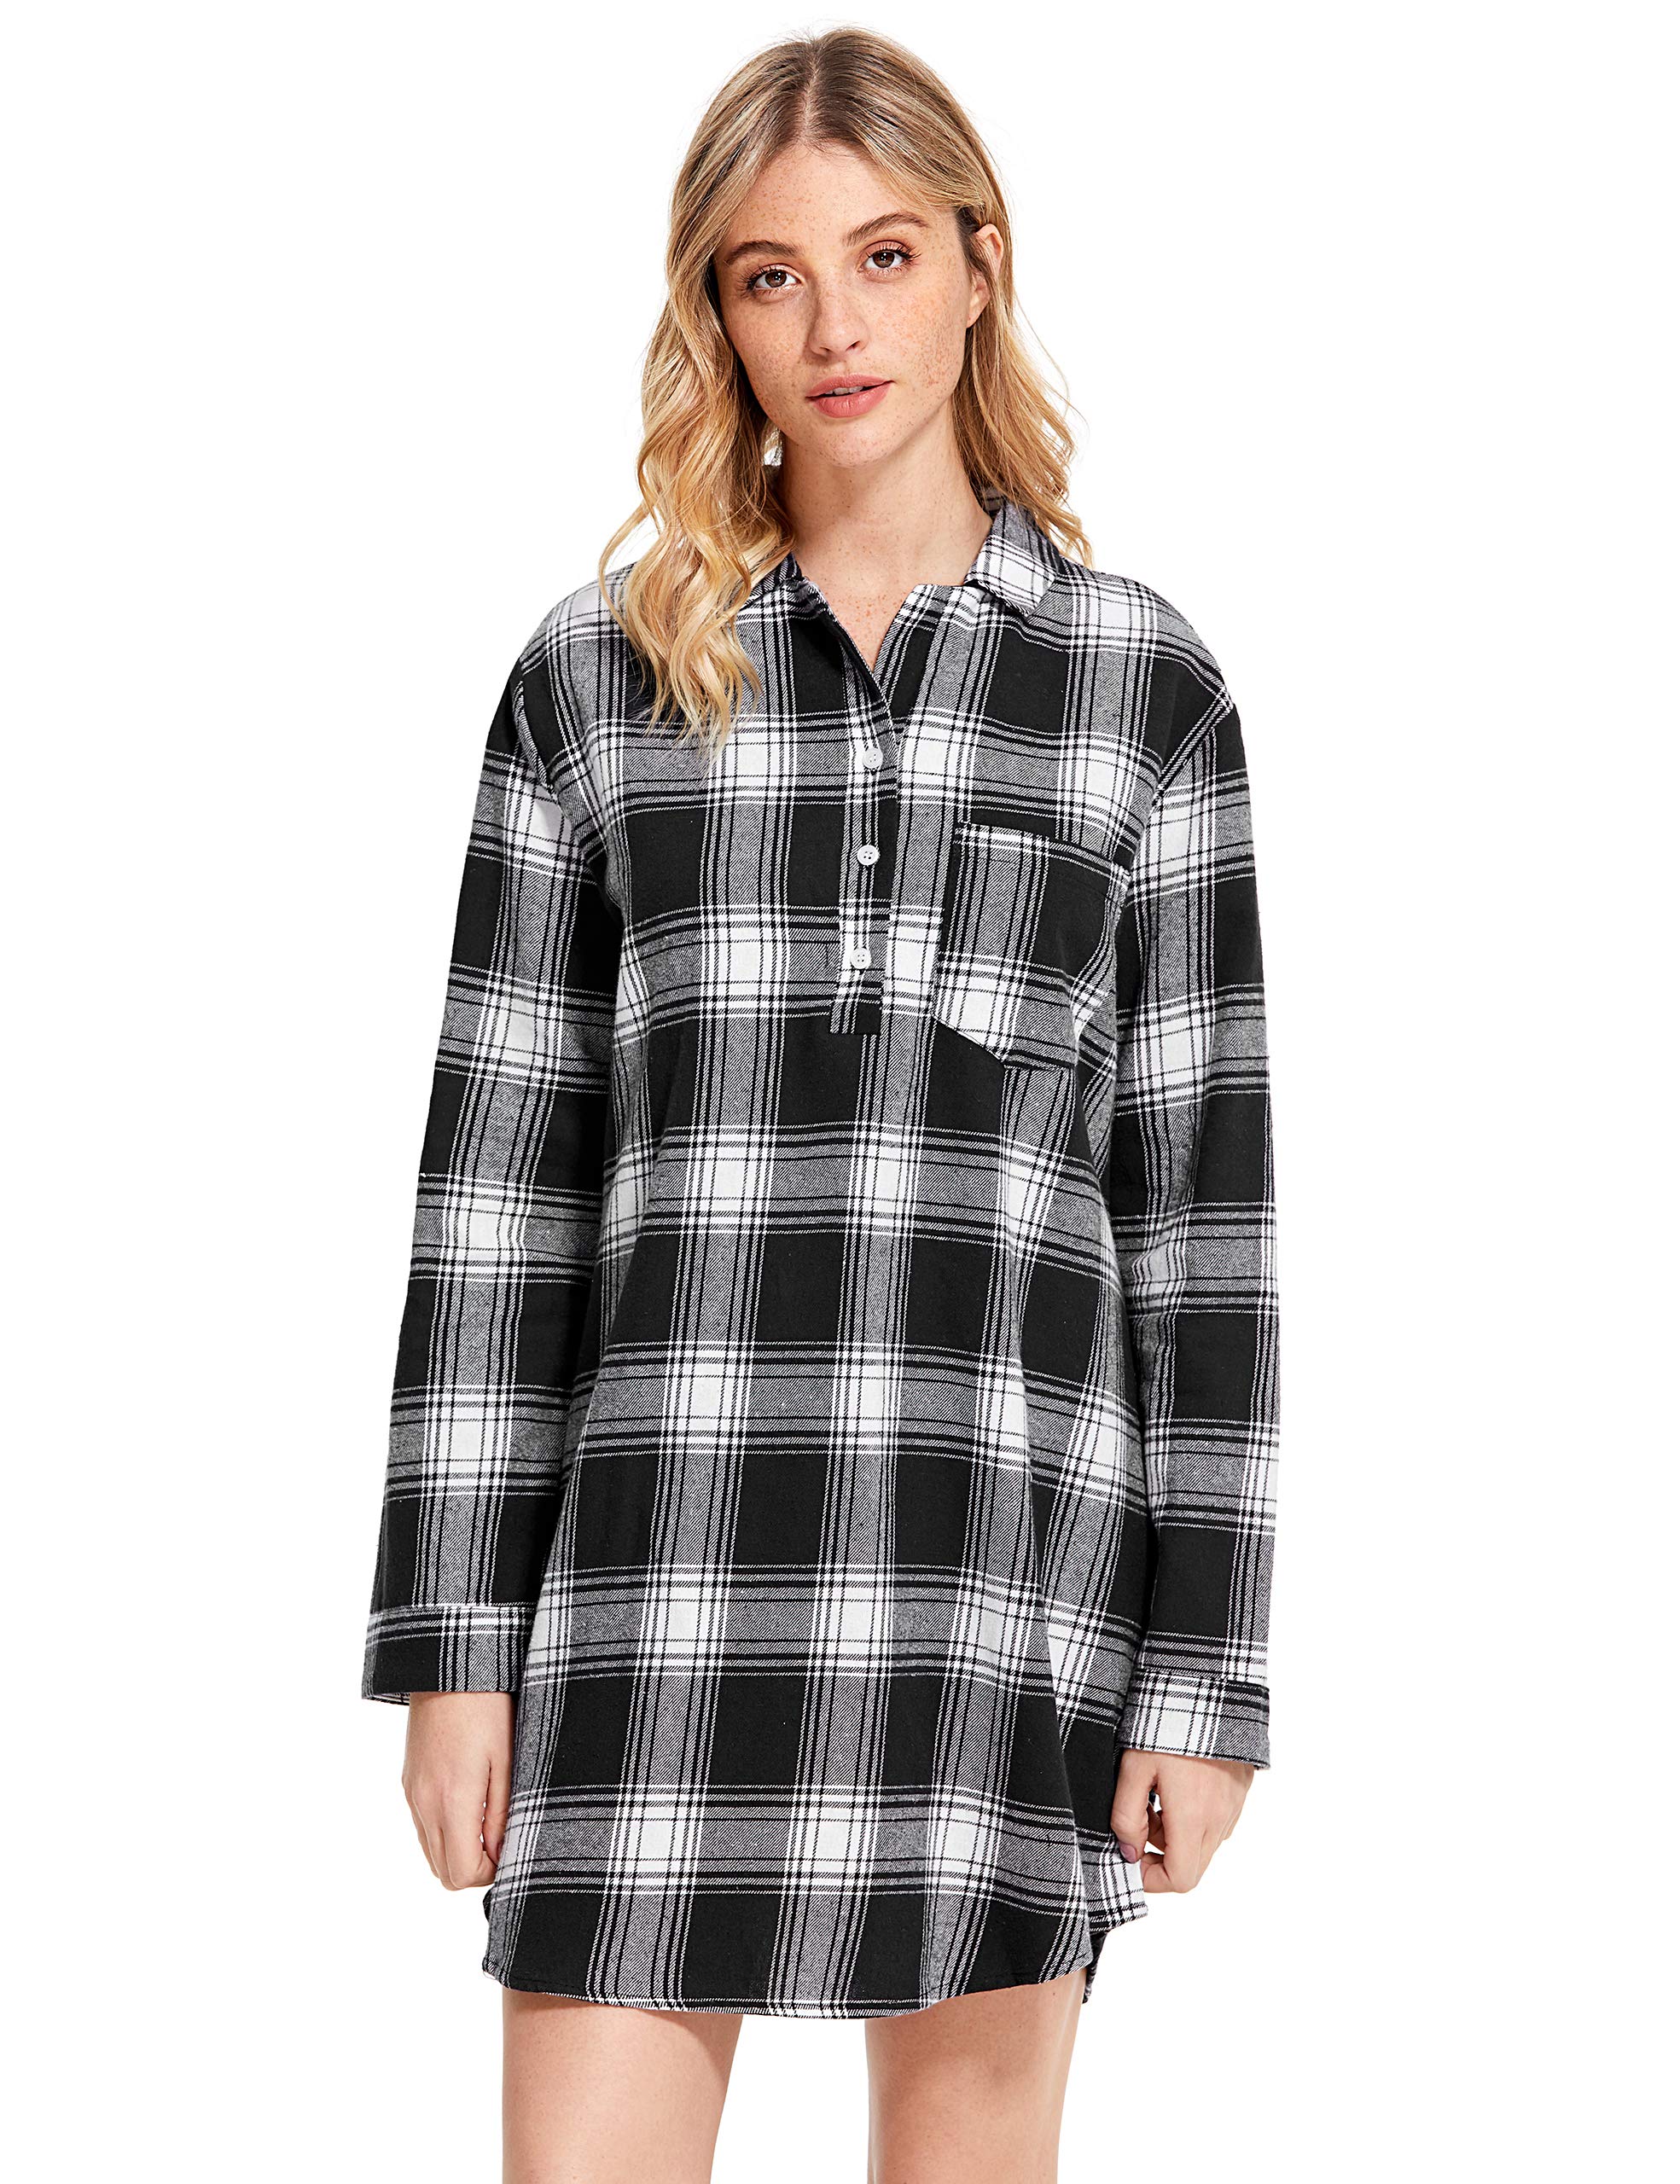 womens long flannel nightgowns